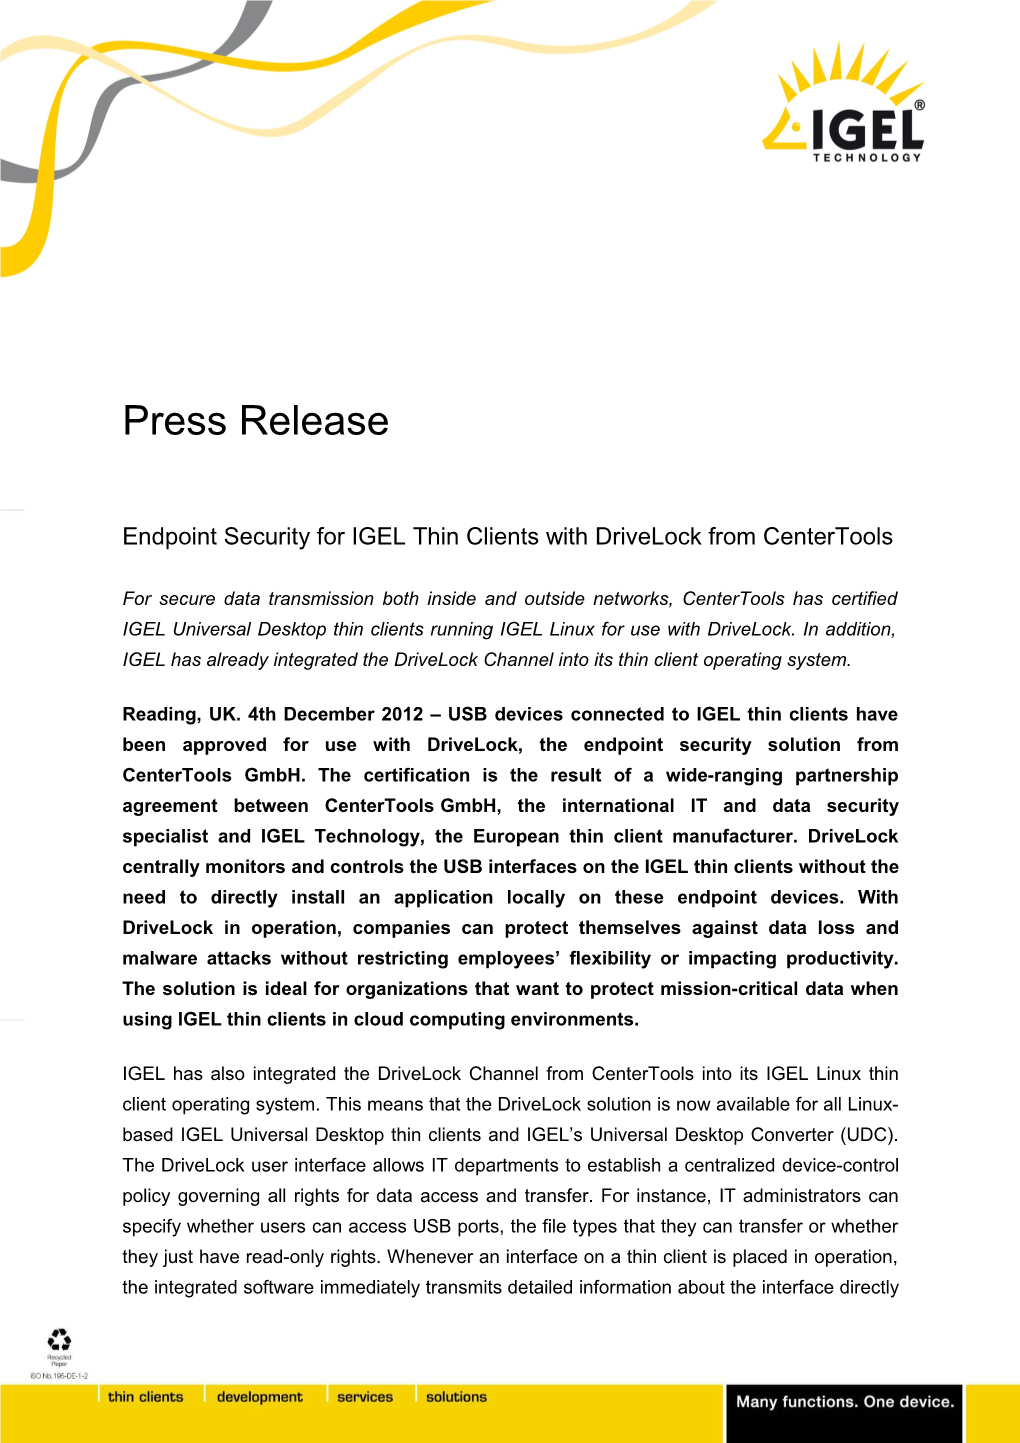 Endpoint Security for IGEL Thin Clients with Drivelock from Centertools